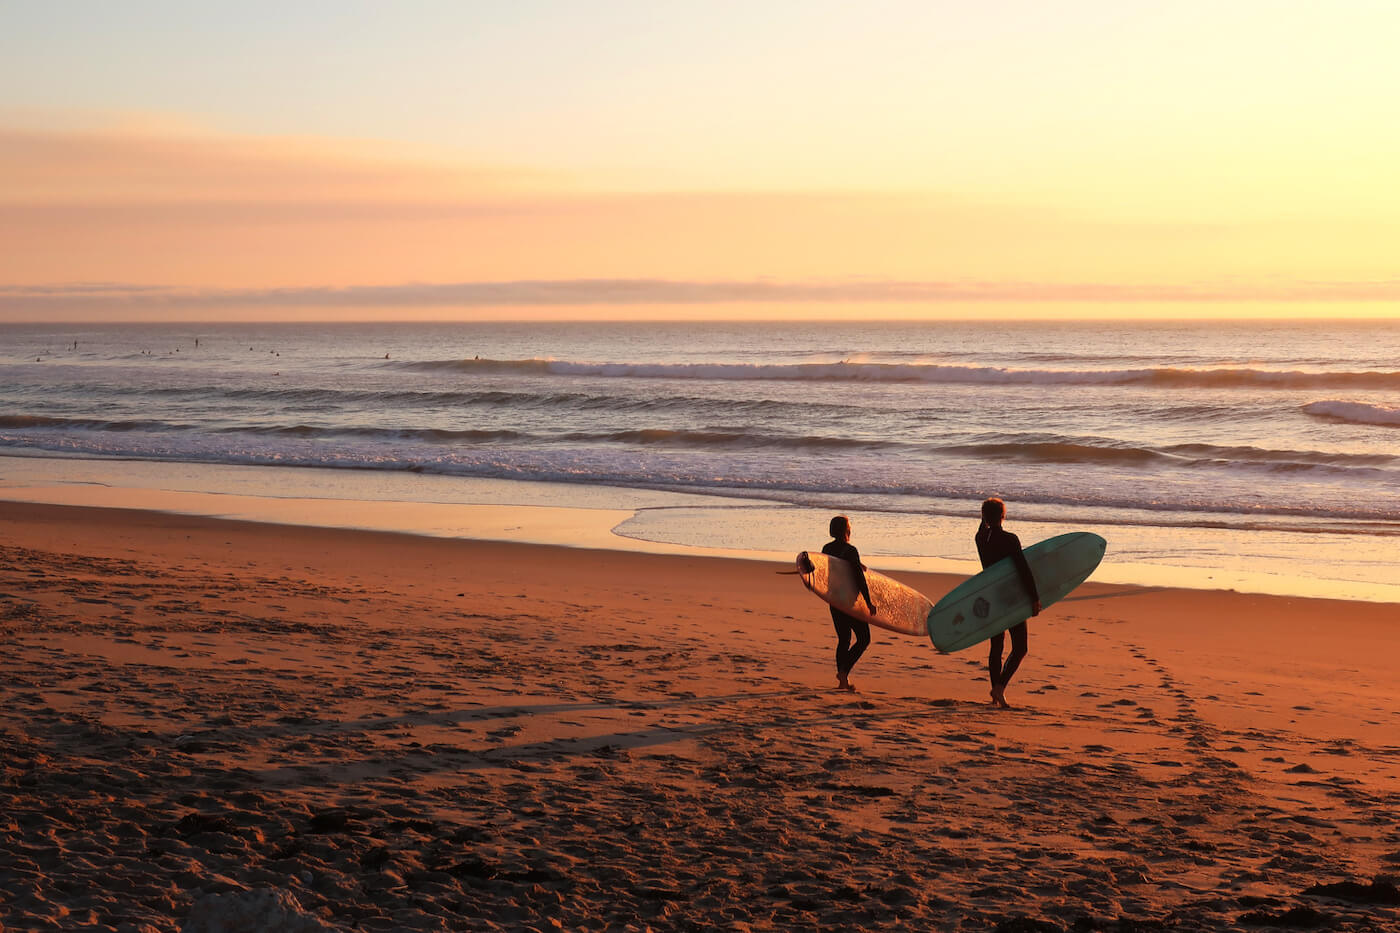 All You Need to Know About Surfing in Oceanside from a Local Expert